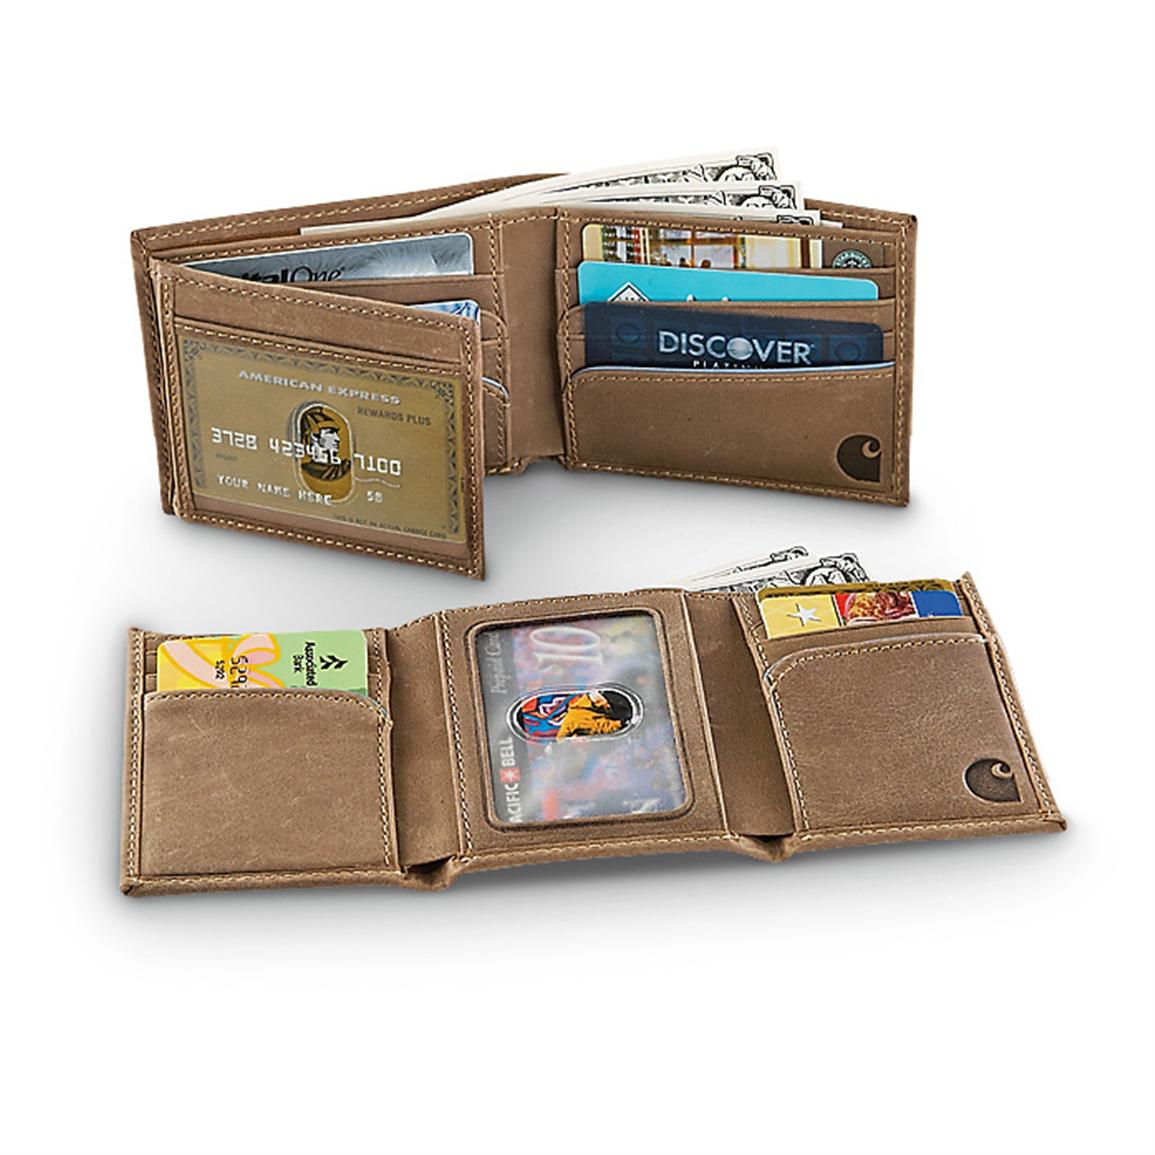 Carhartt® Leather Wallet - 225854, Wallets at Sportsman&#39;s Guide